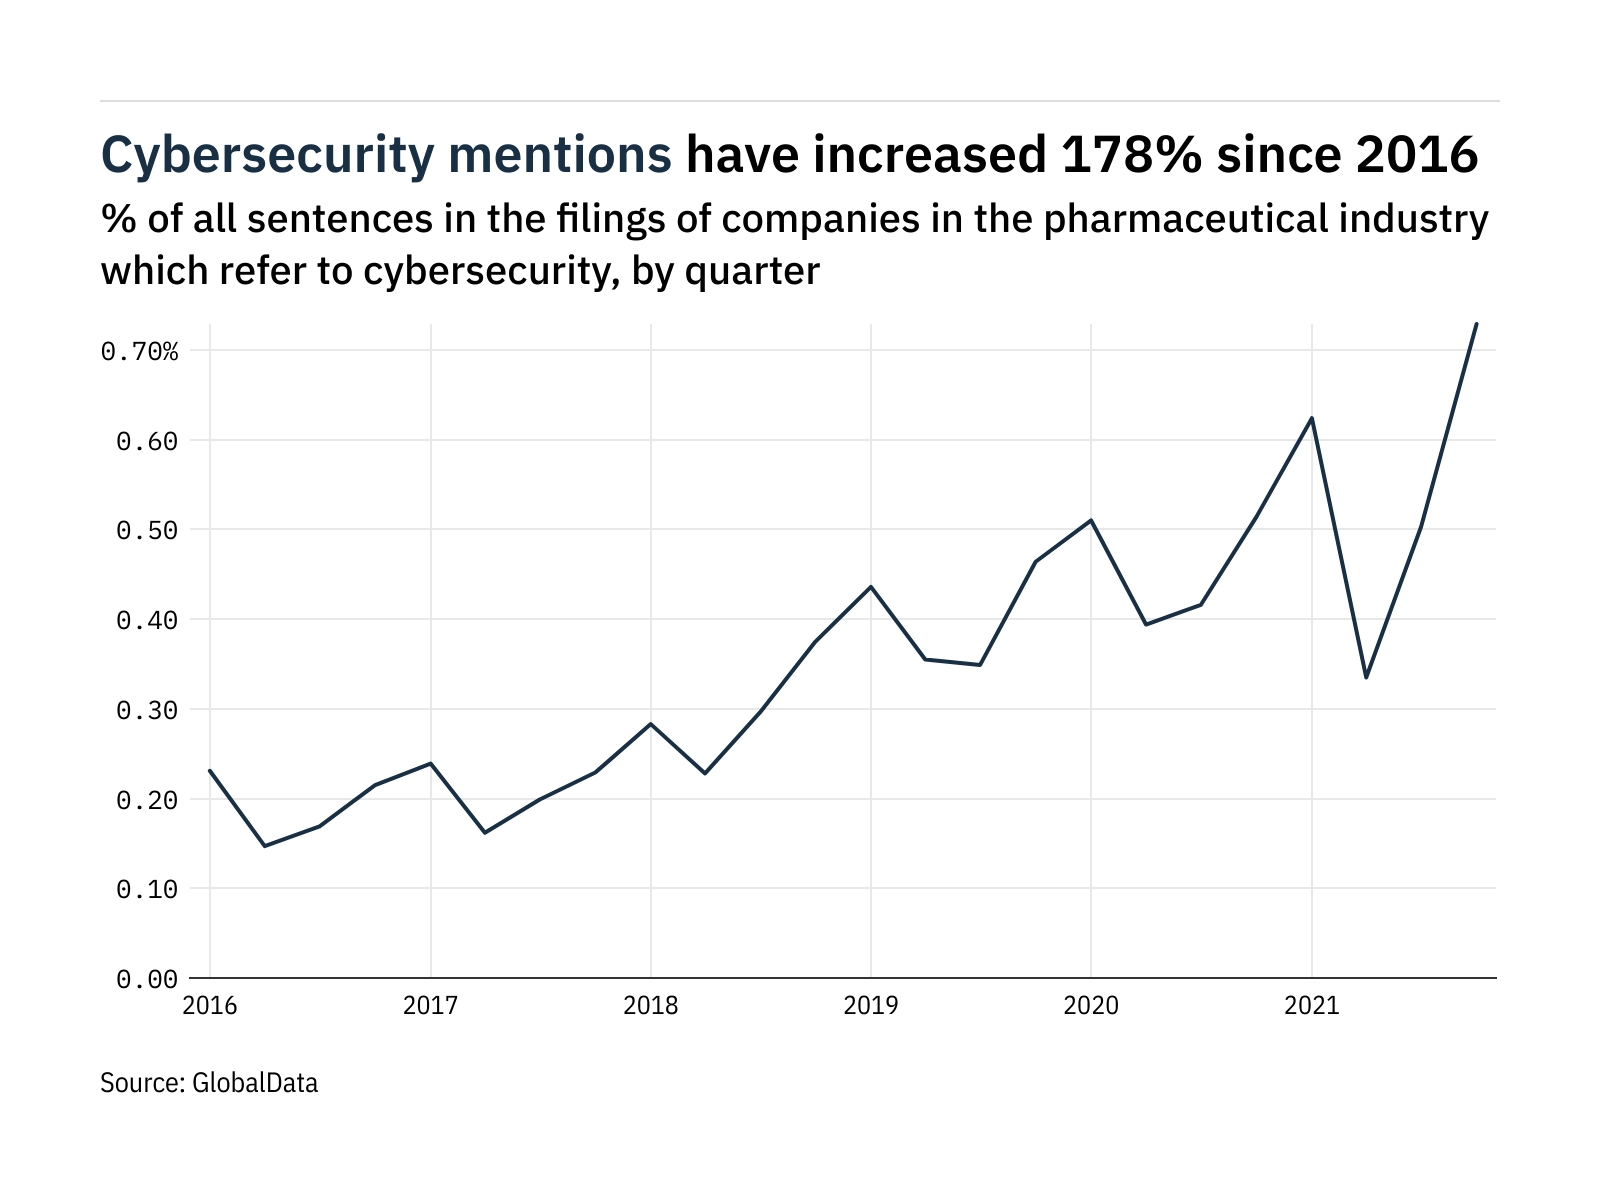 Filings buzz in pharmaceuticals: 45% increase in cybersecurity mentions in Q4 of 2021